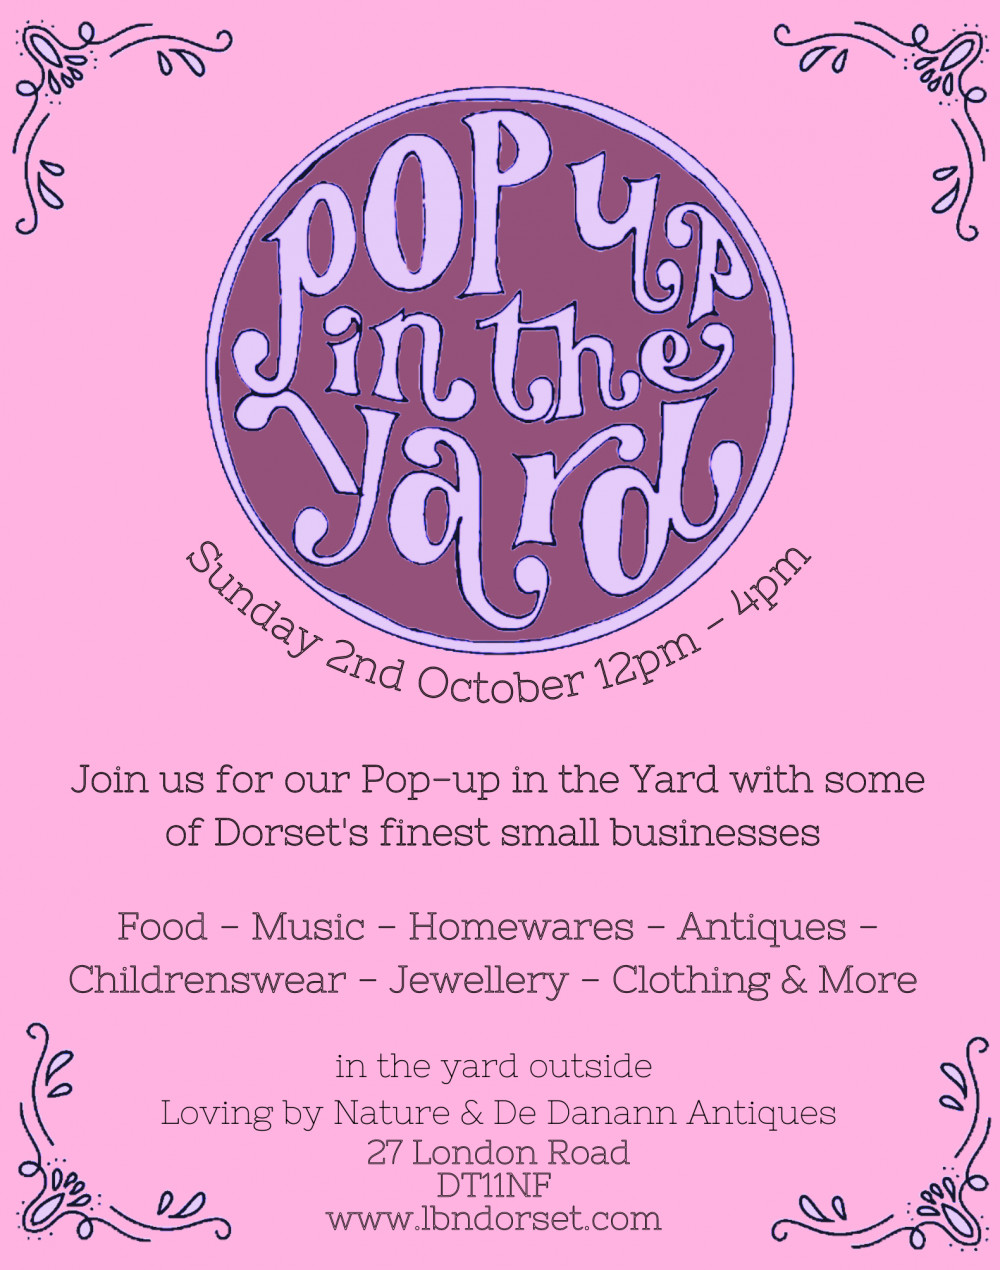 Pop-up in the yard, Dorchester.